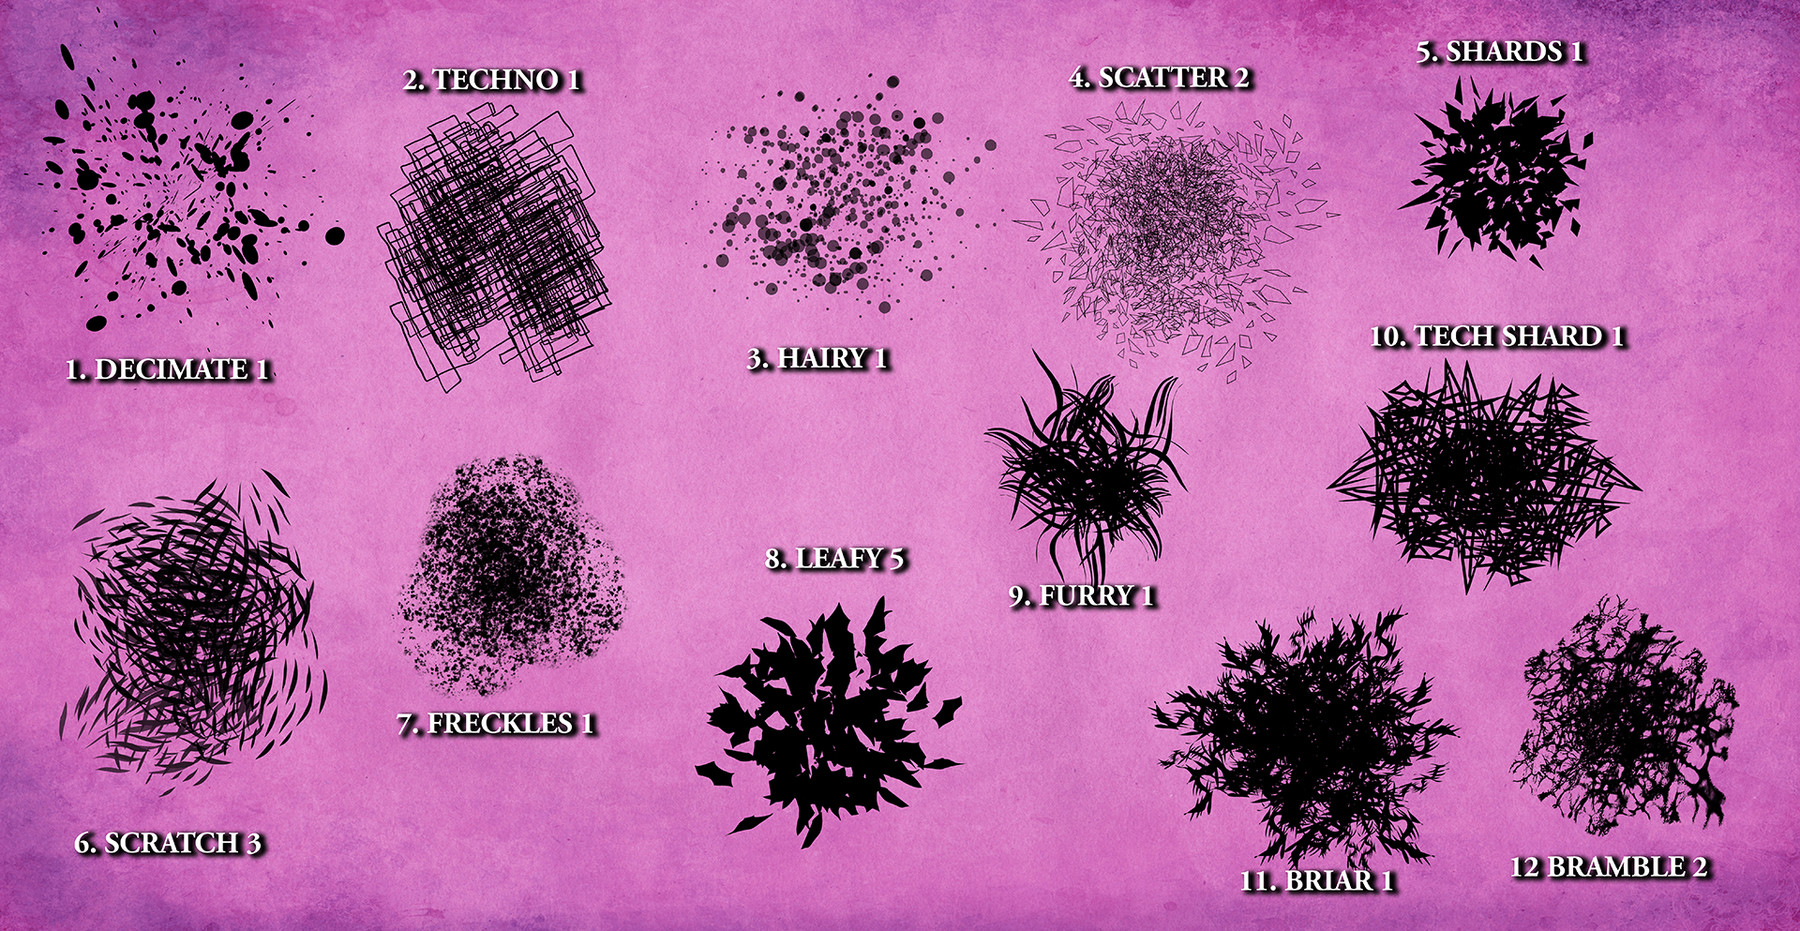 adobe photoshop cs6 brushes pack download